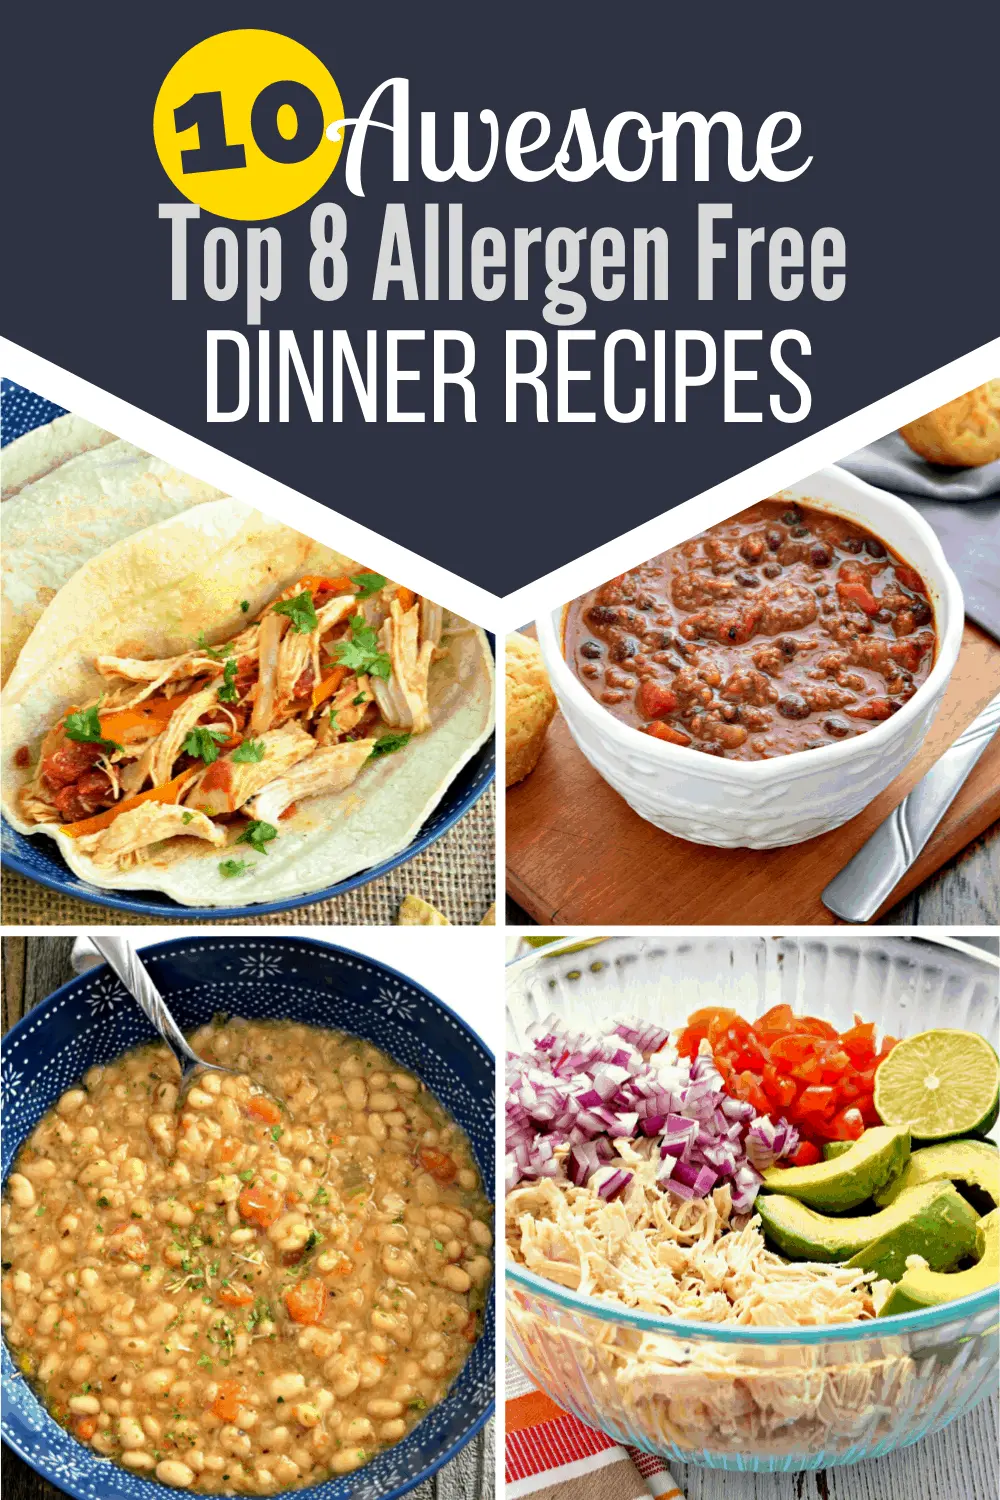 Allergen-free recipes: What to eat for food allergies